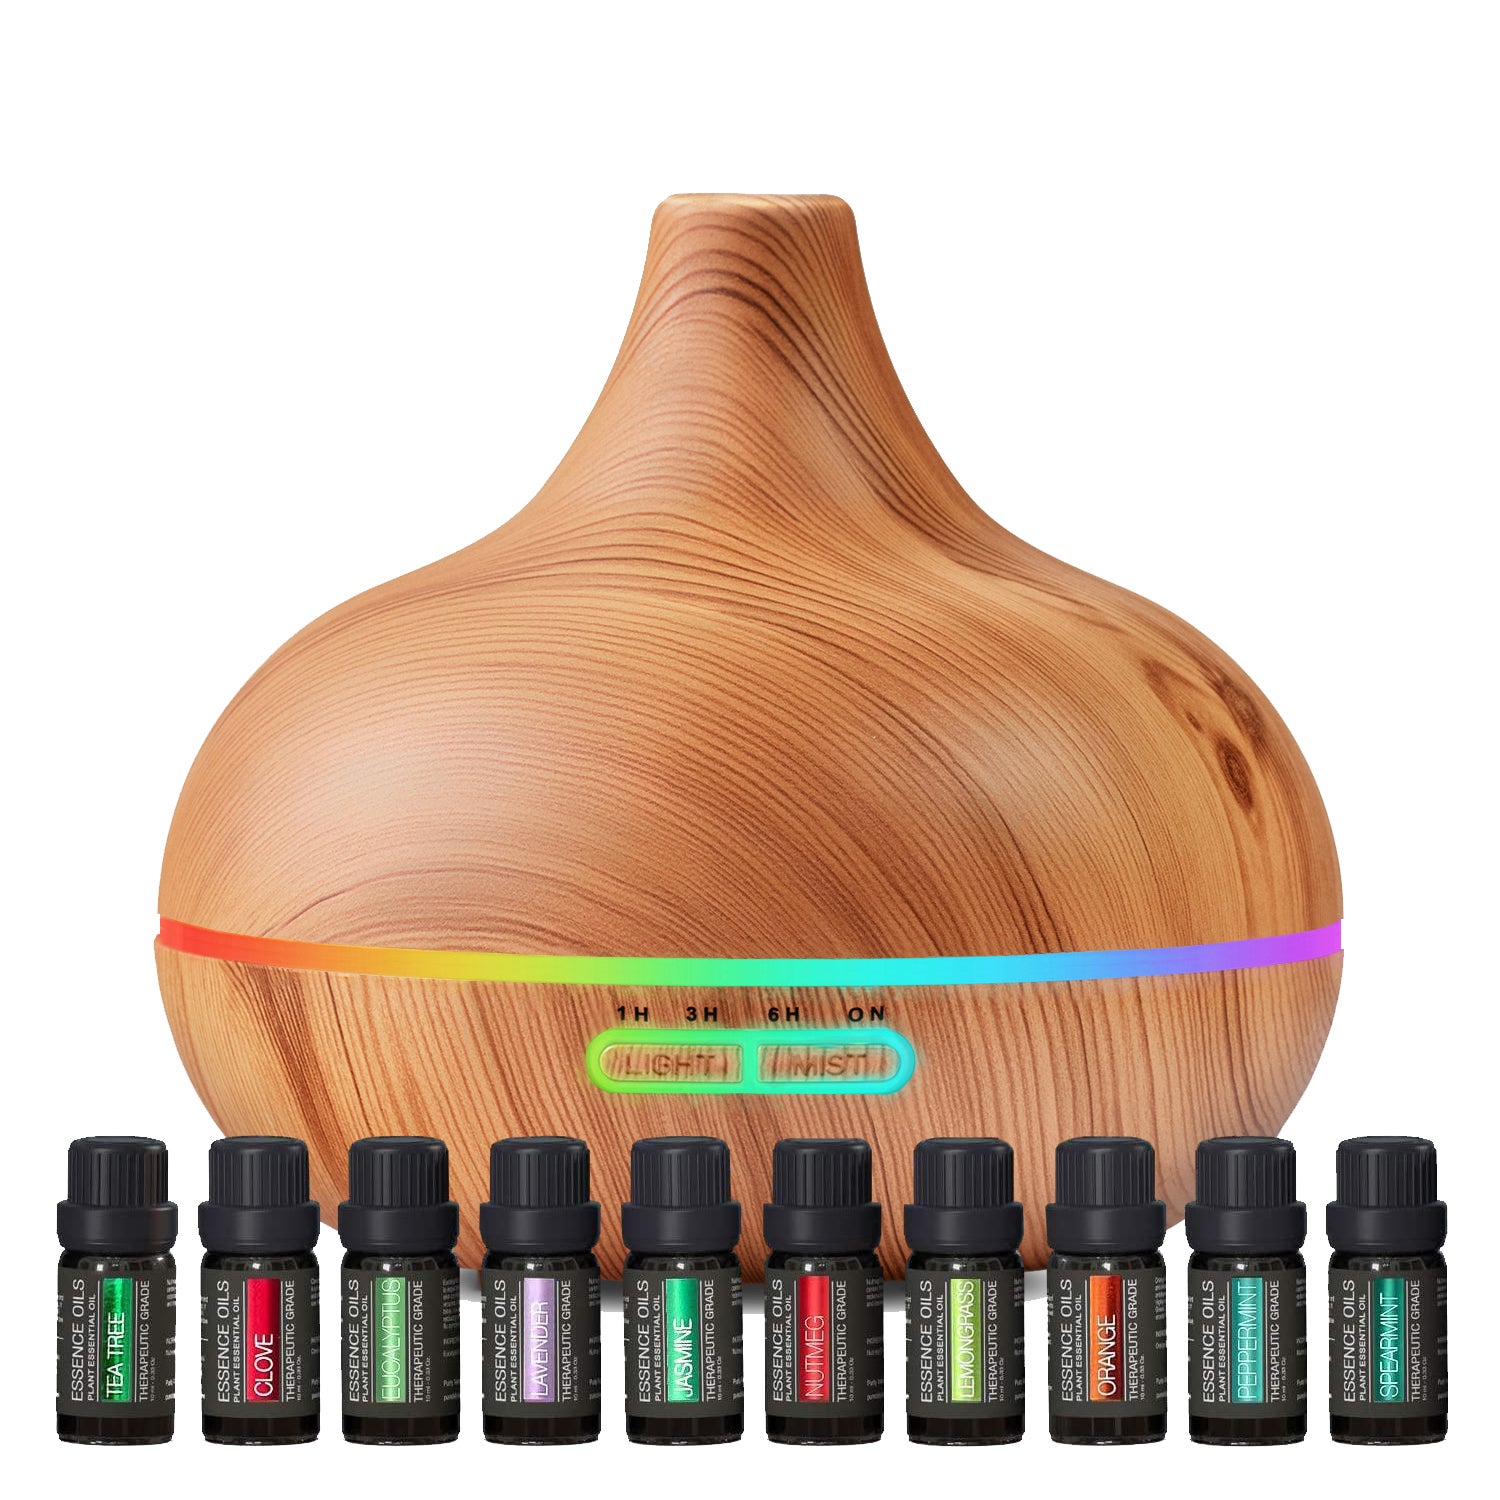 Ultimate aromatherapy diffuser and indispensable  lipid  set